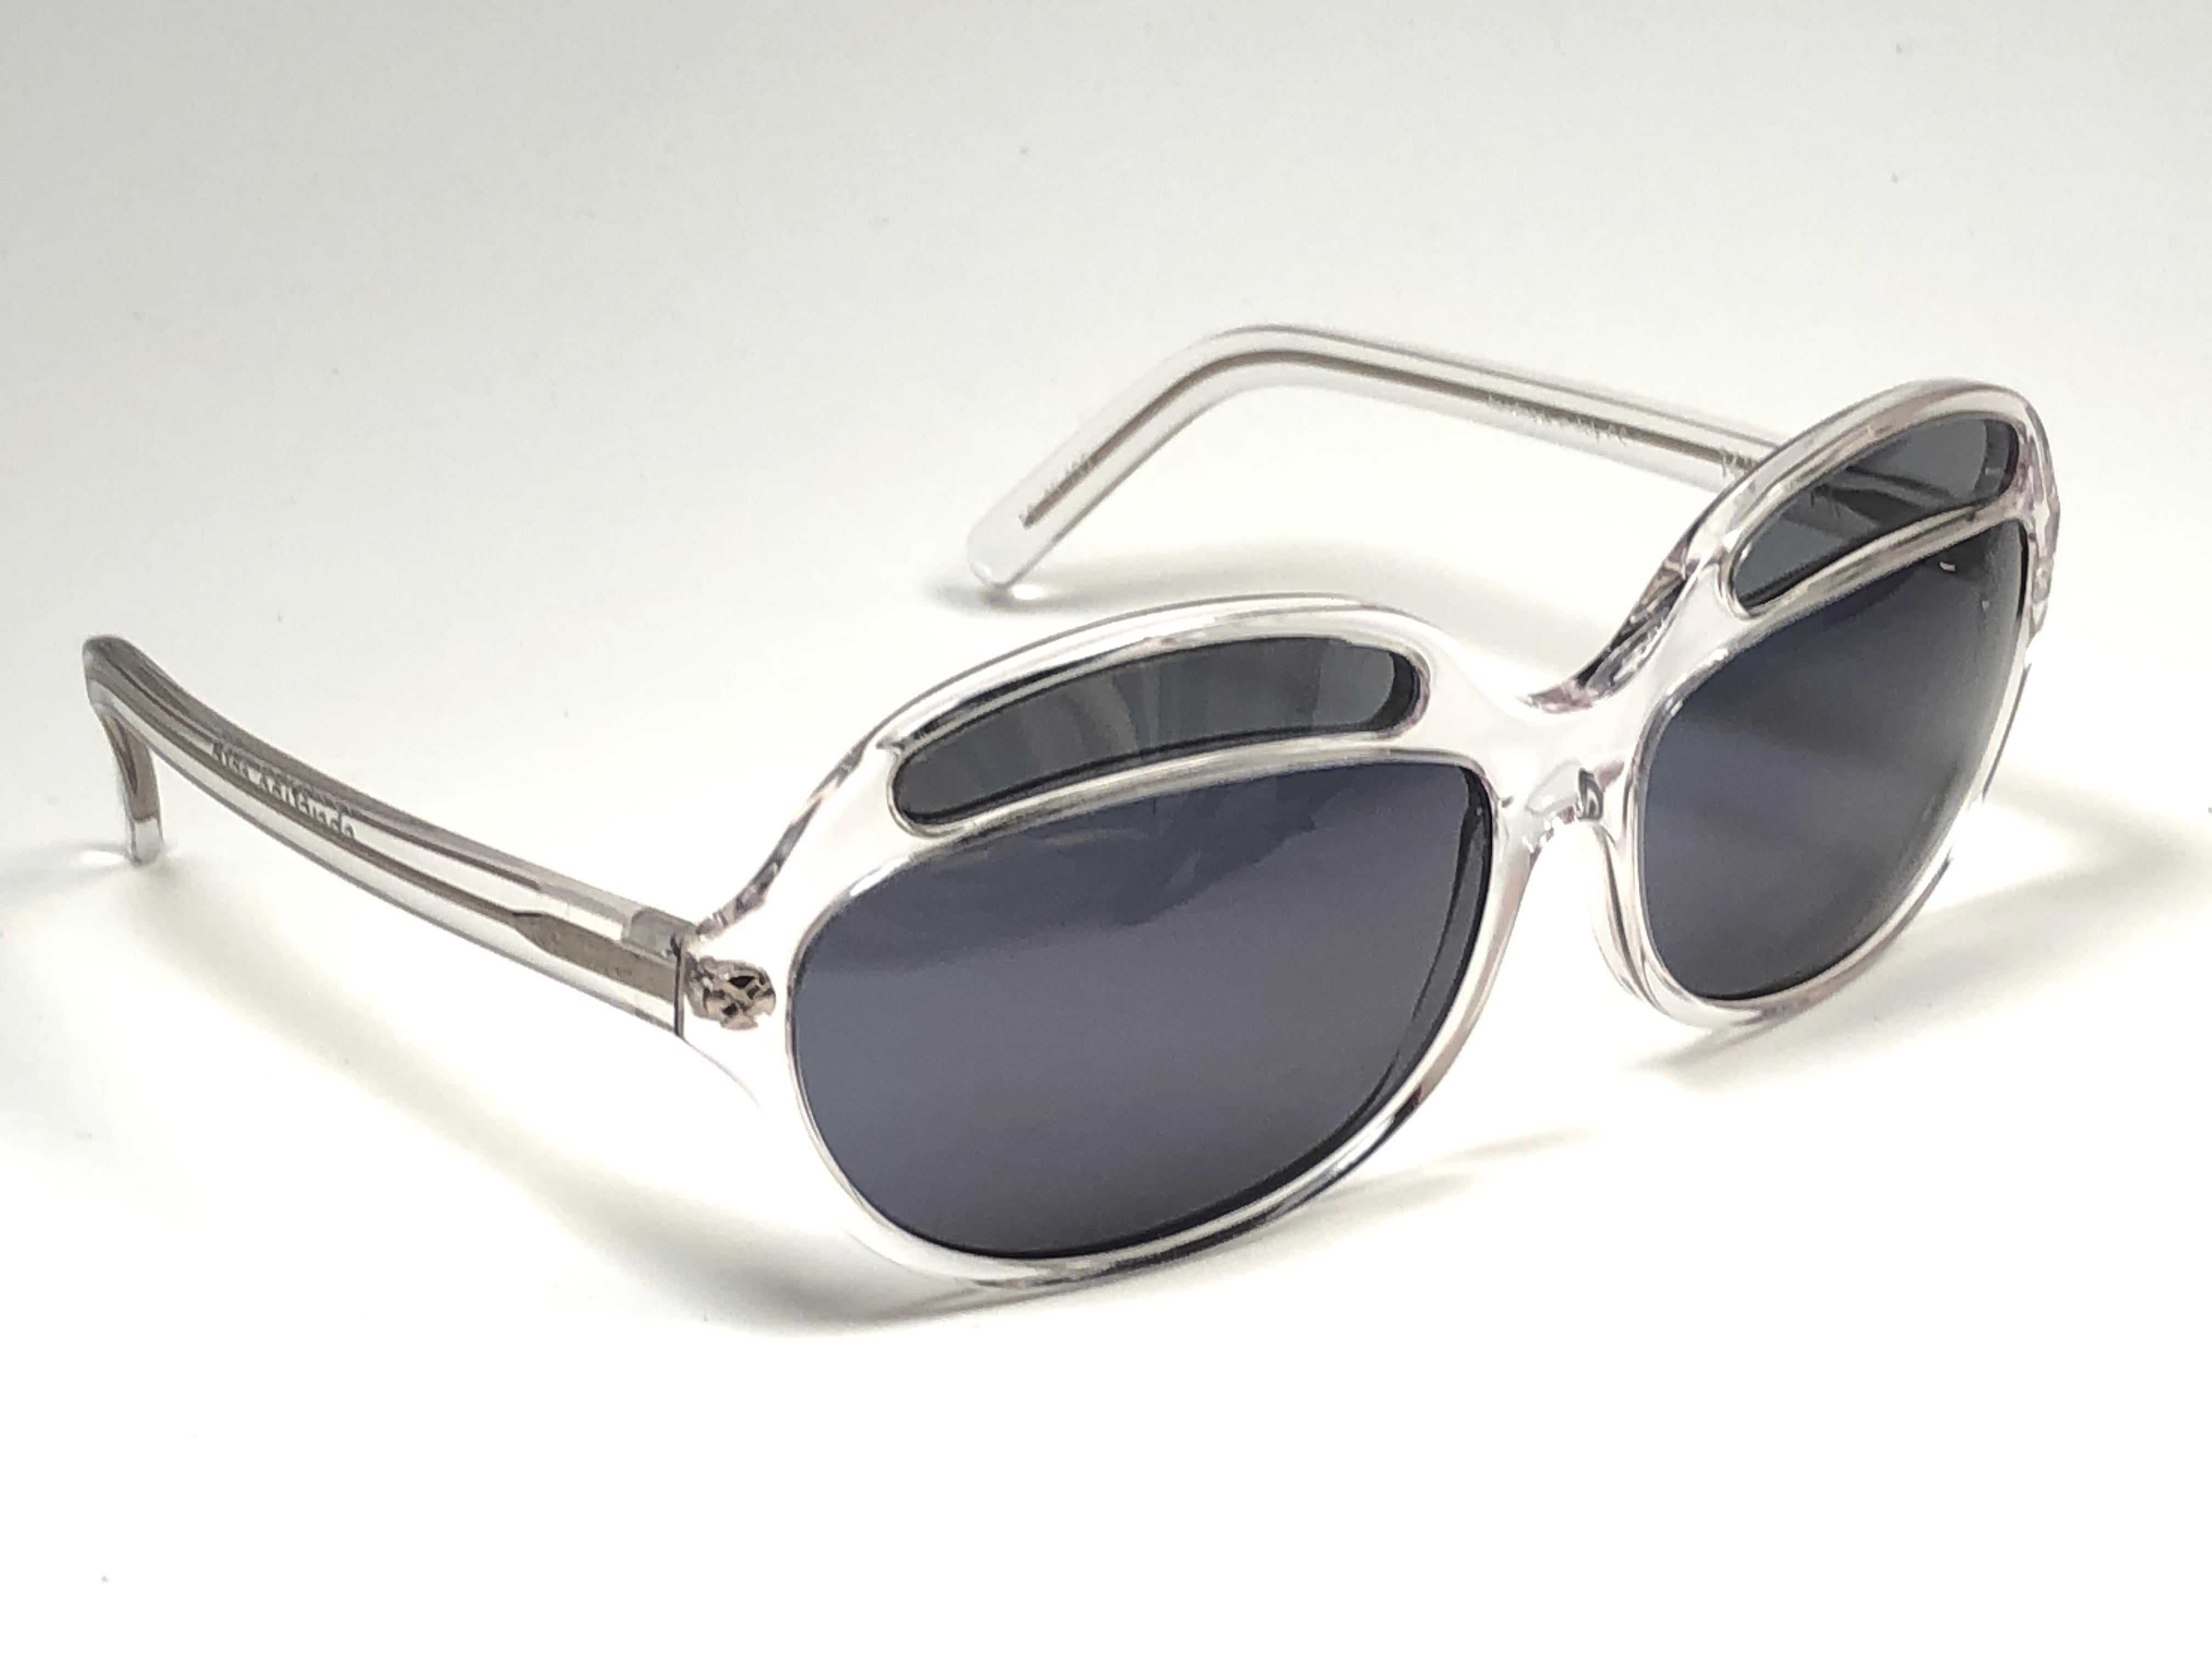 New Vintage Christian Roth translucent bug eyed. Spotless grey lenses.

New, never worn or displayed this pair may show minor sign of wear due to storage.

Handmade in Italy.